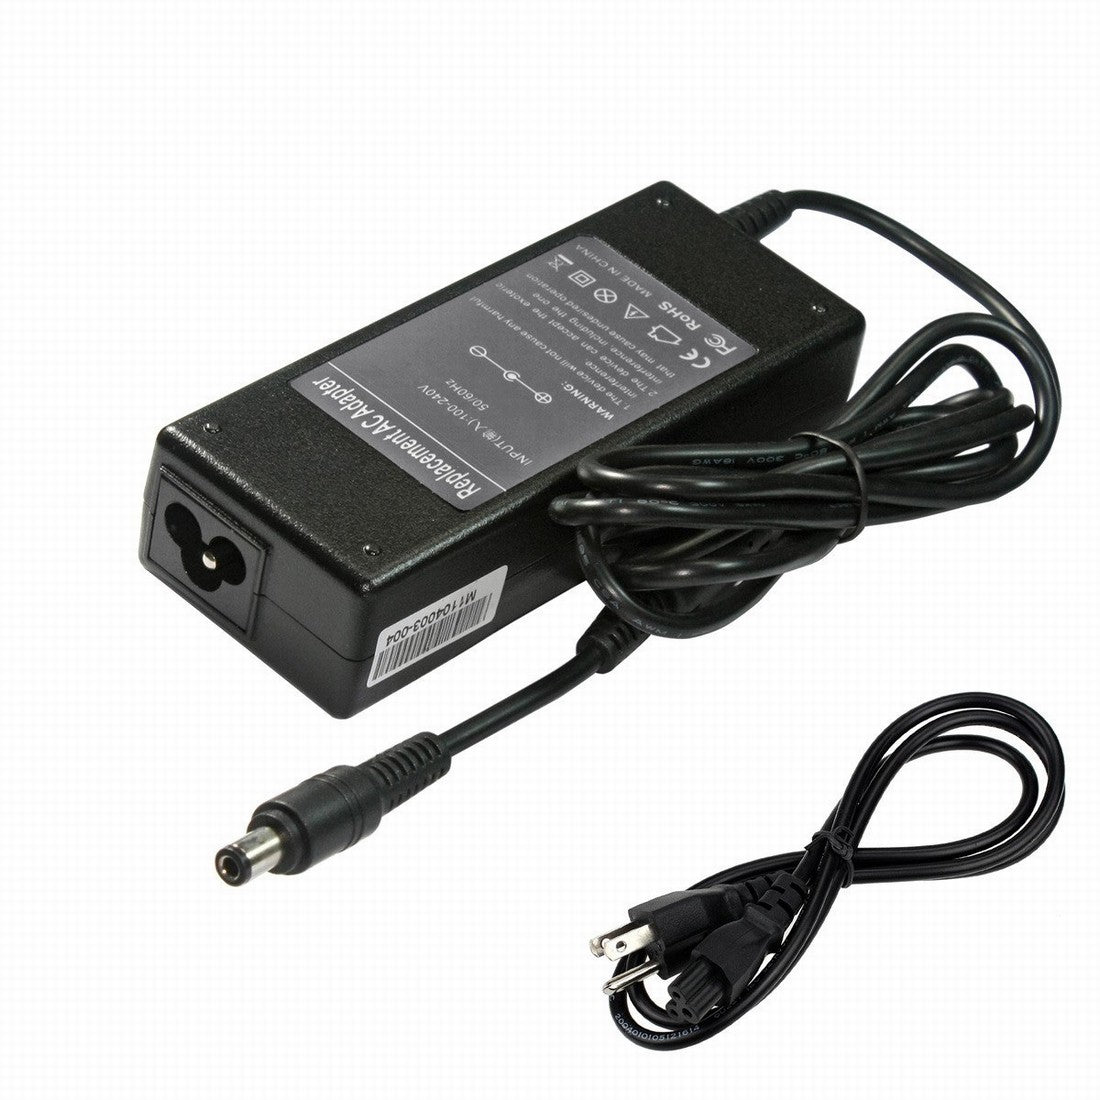 Power Supply for Acer AL1913 LCD Monitor.